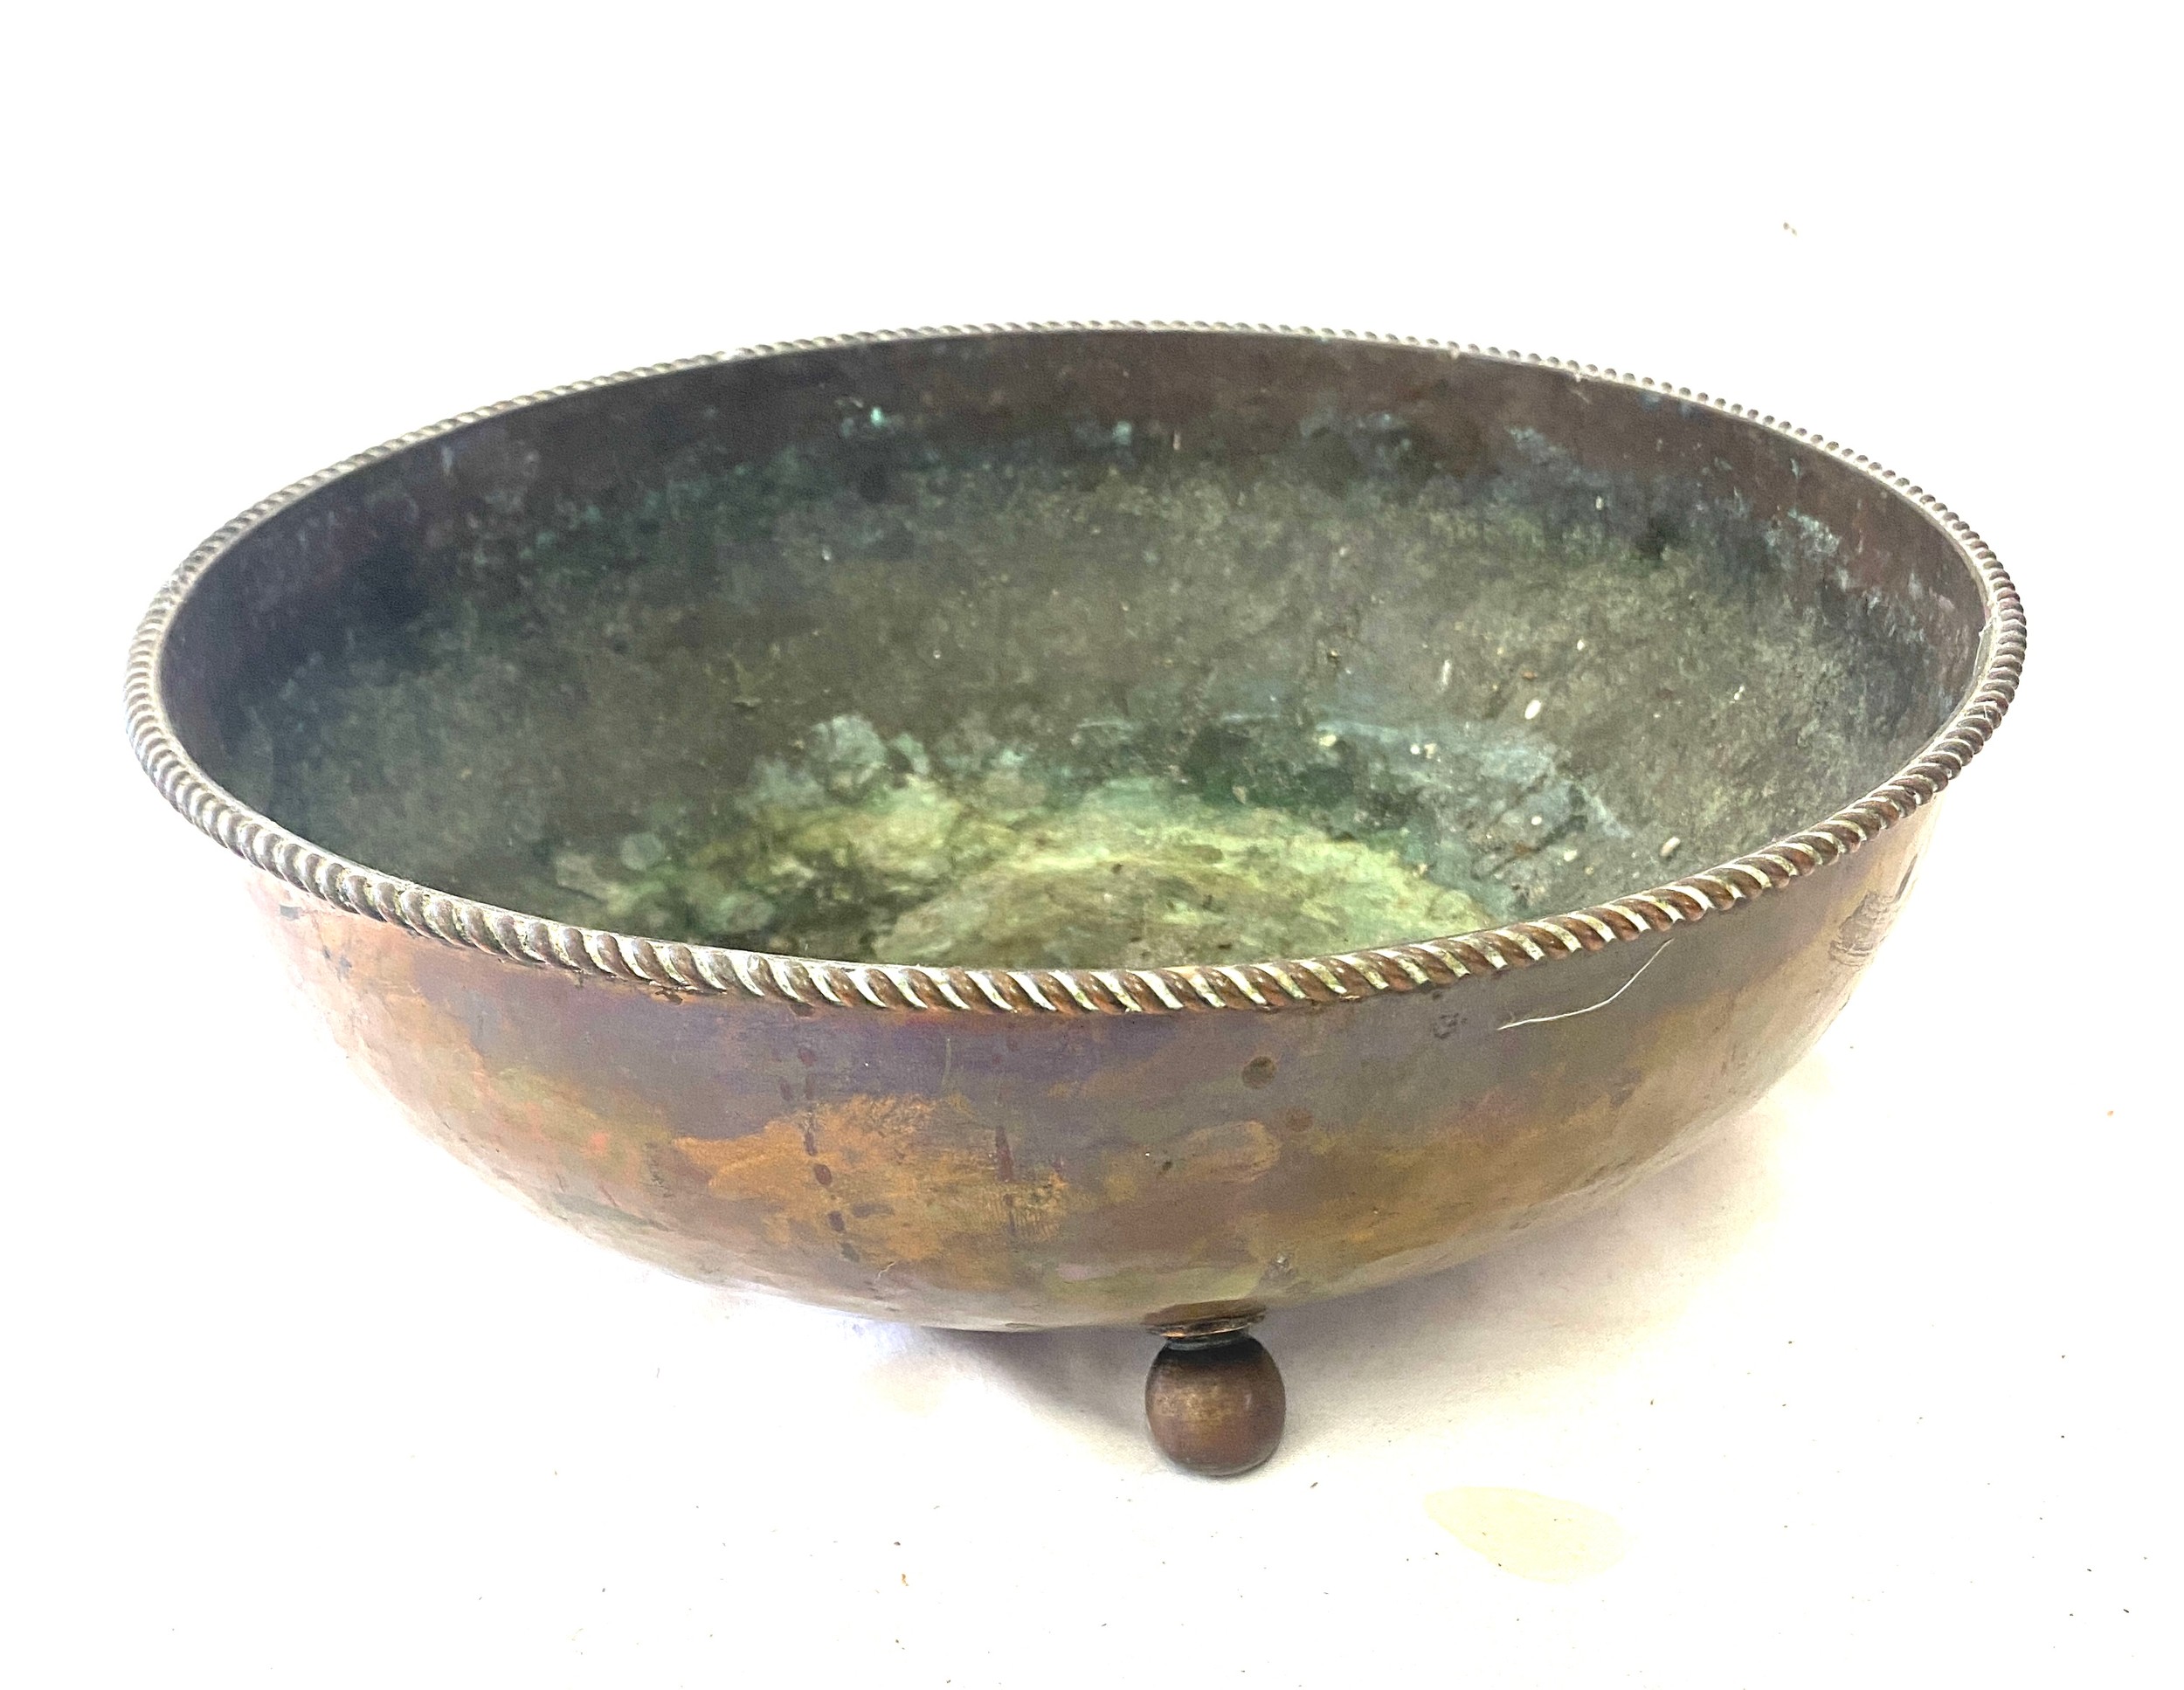 Vintage arts and crafts Drxan lester copper bowl diameter approx 11.5 inches - Image 2 of 6